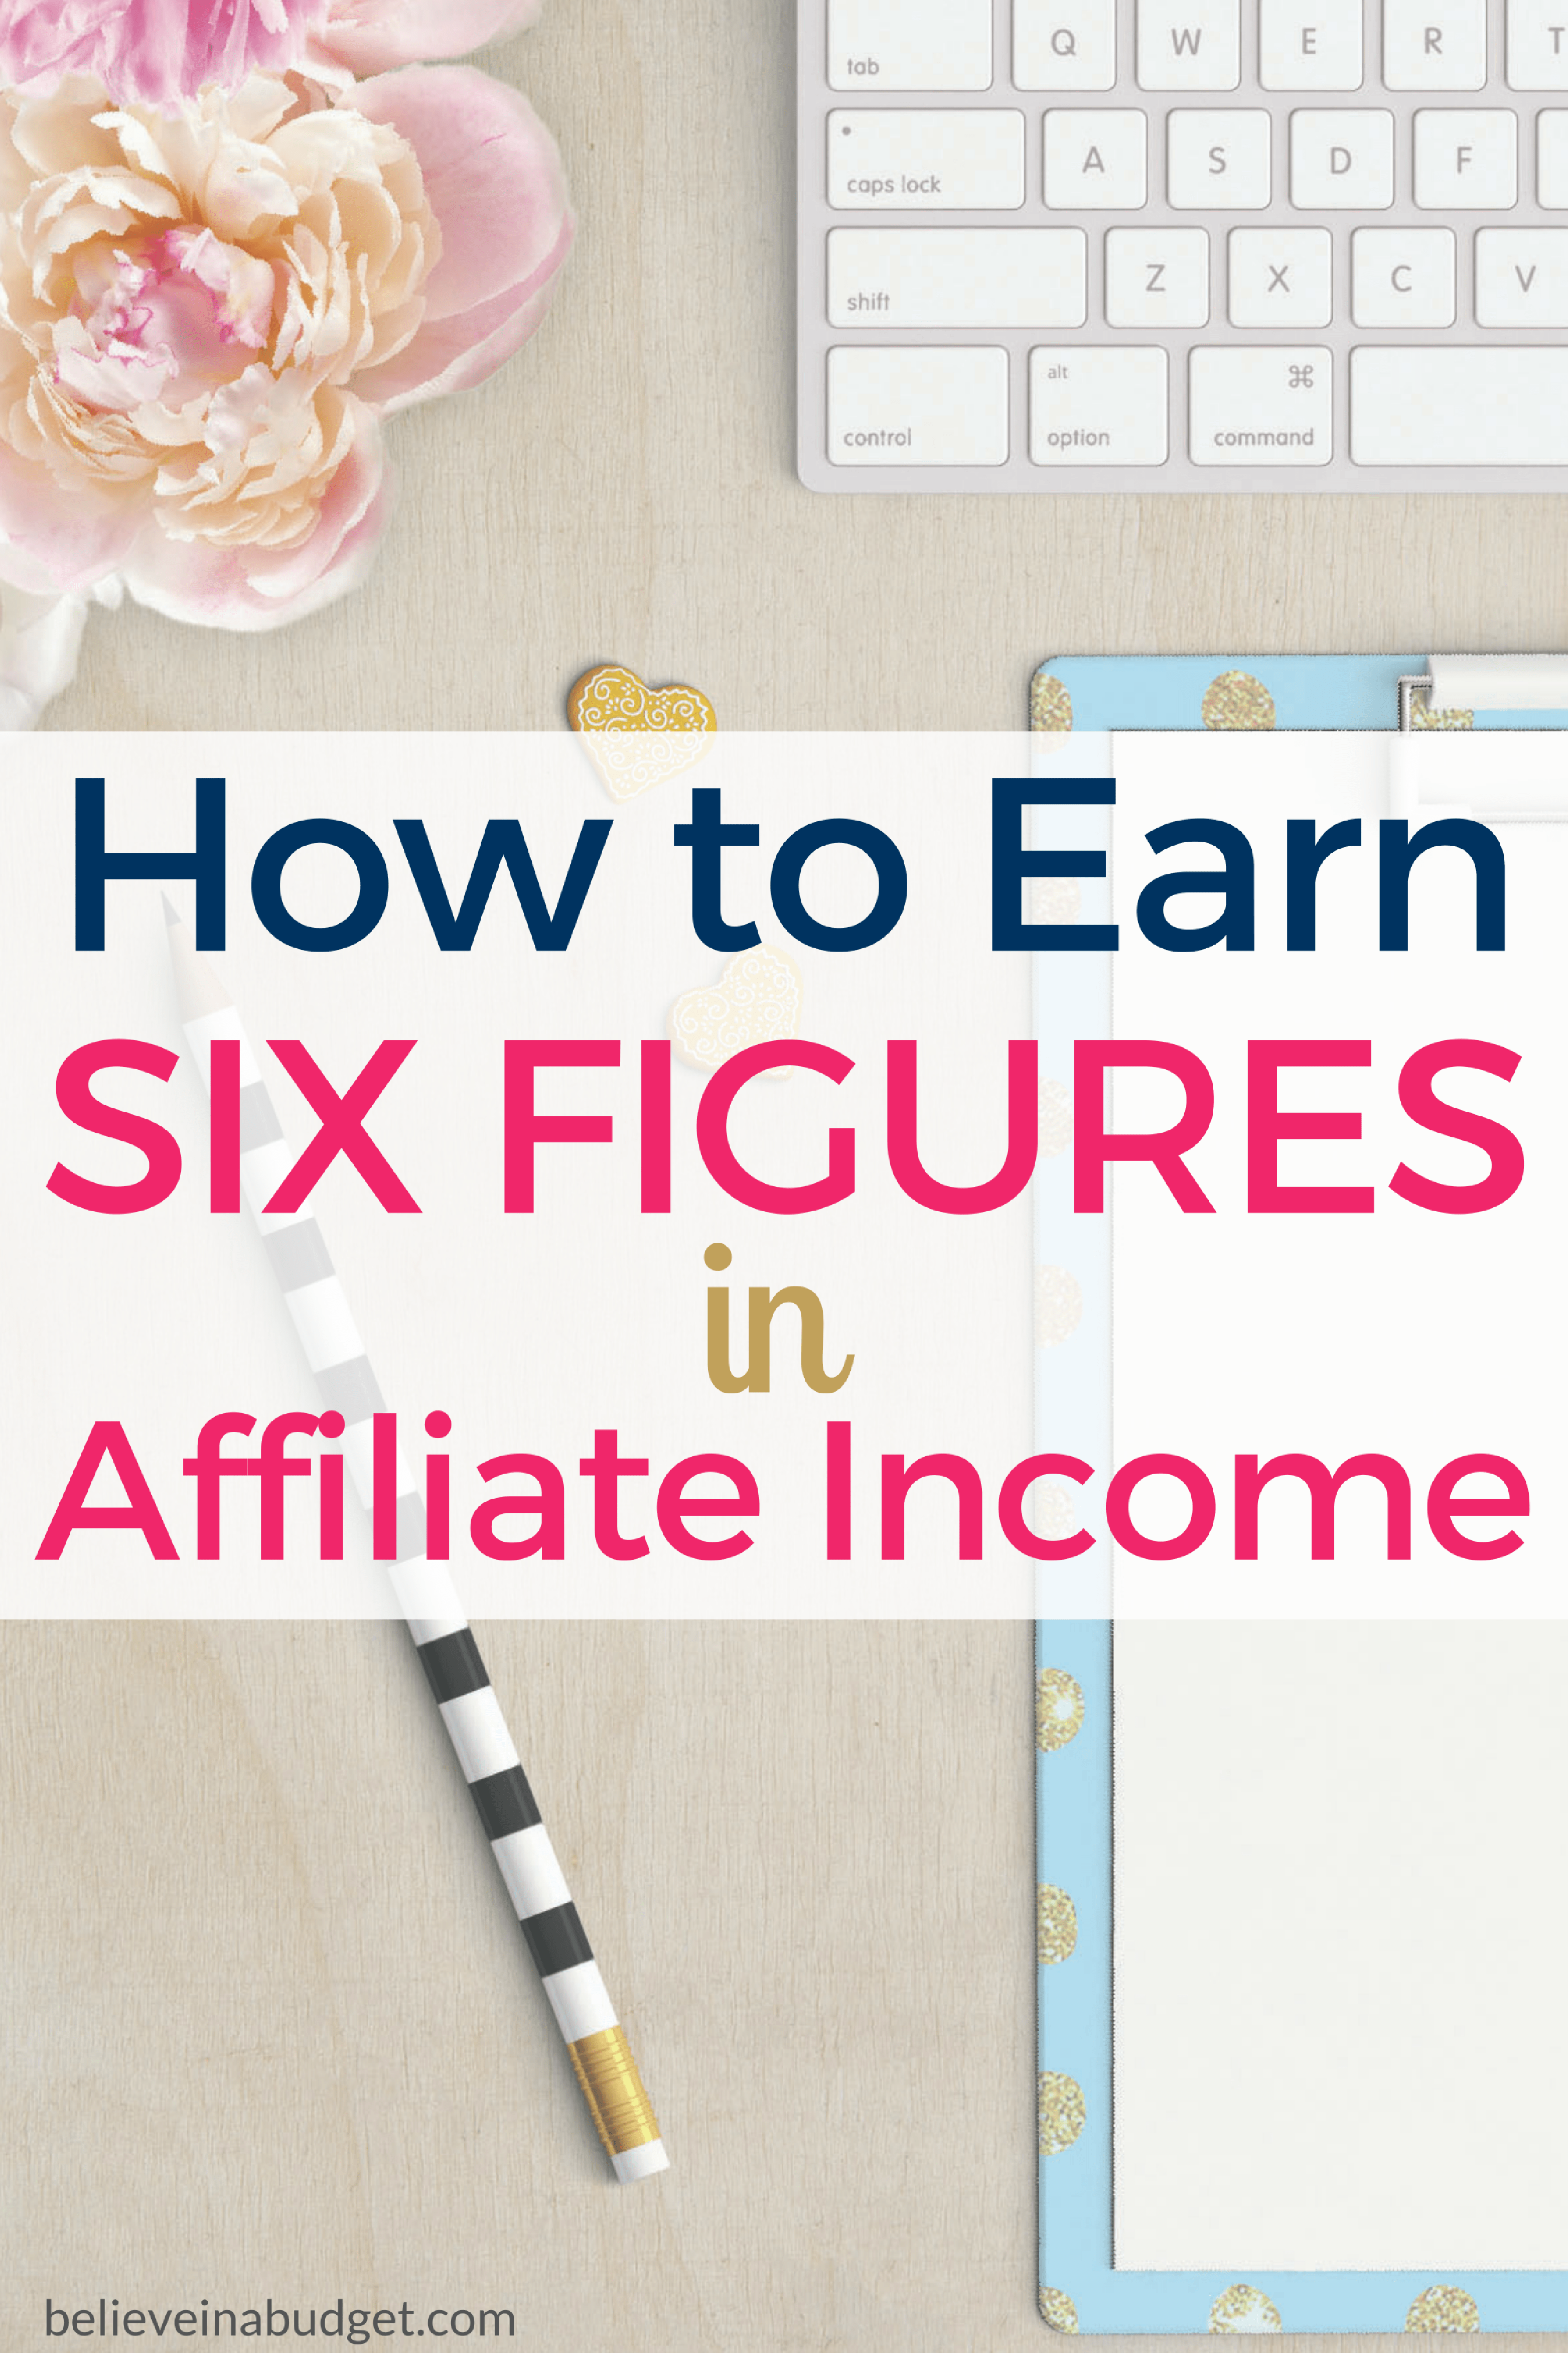 Affiliate income is one of the best ways to make extra money online. If you want to make more money, learn how to use affiliate marketing! 